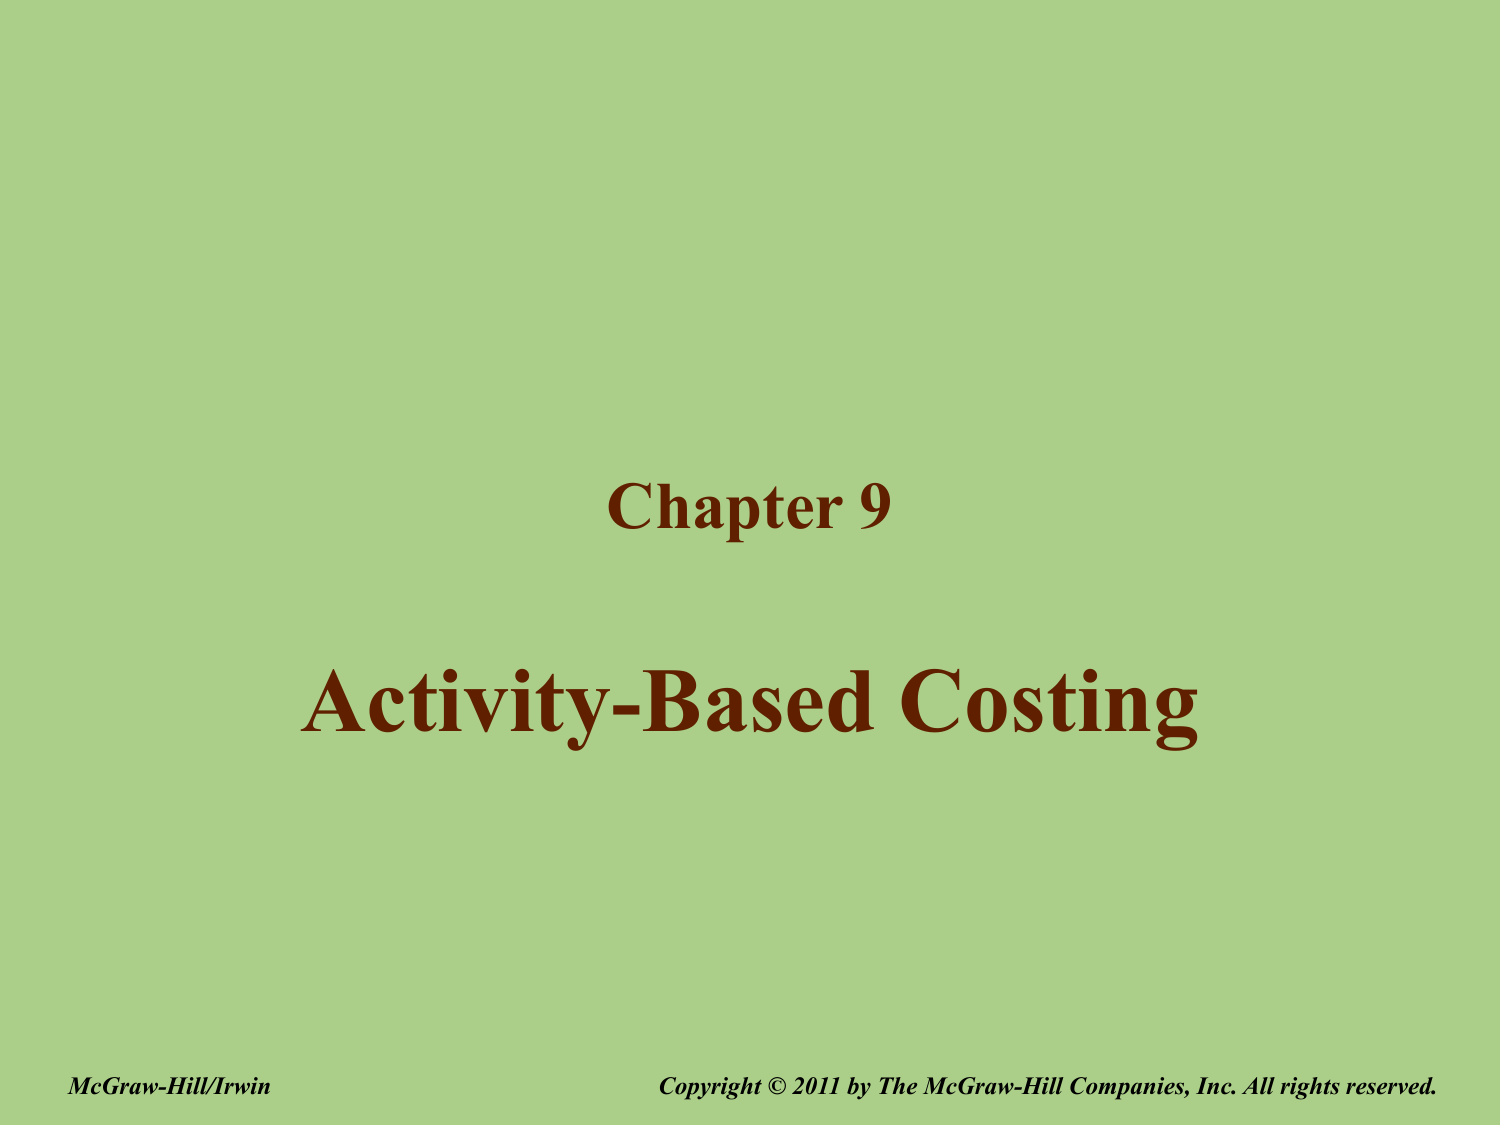 Chapter 9 – Activity-Based Costing